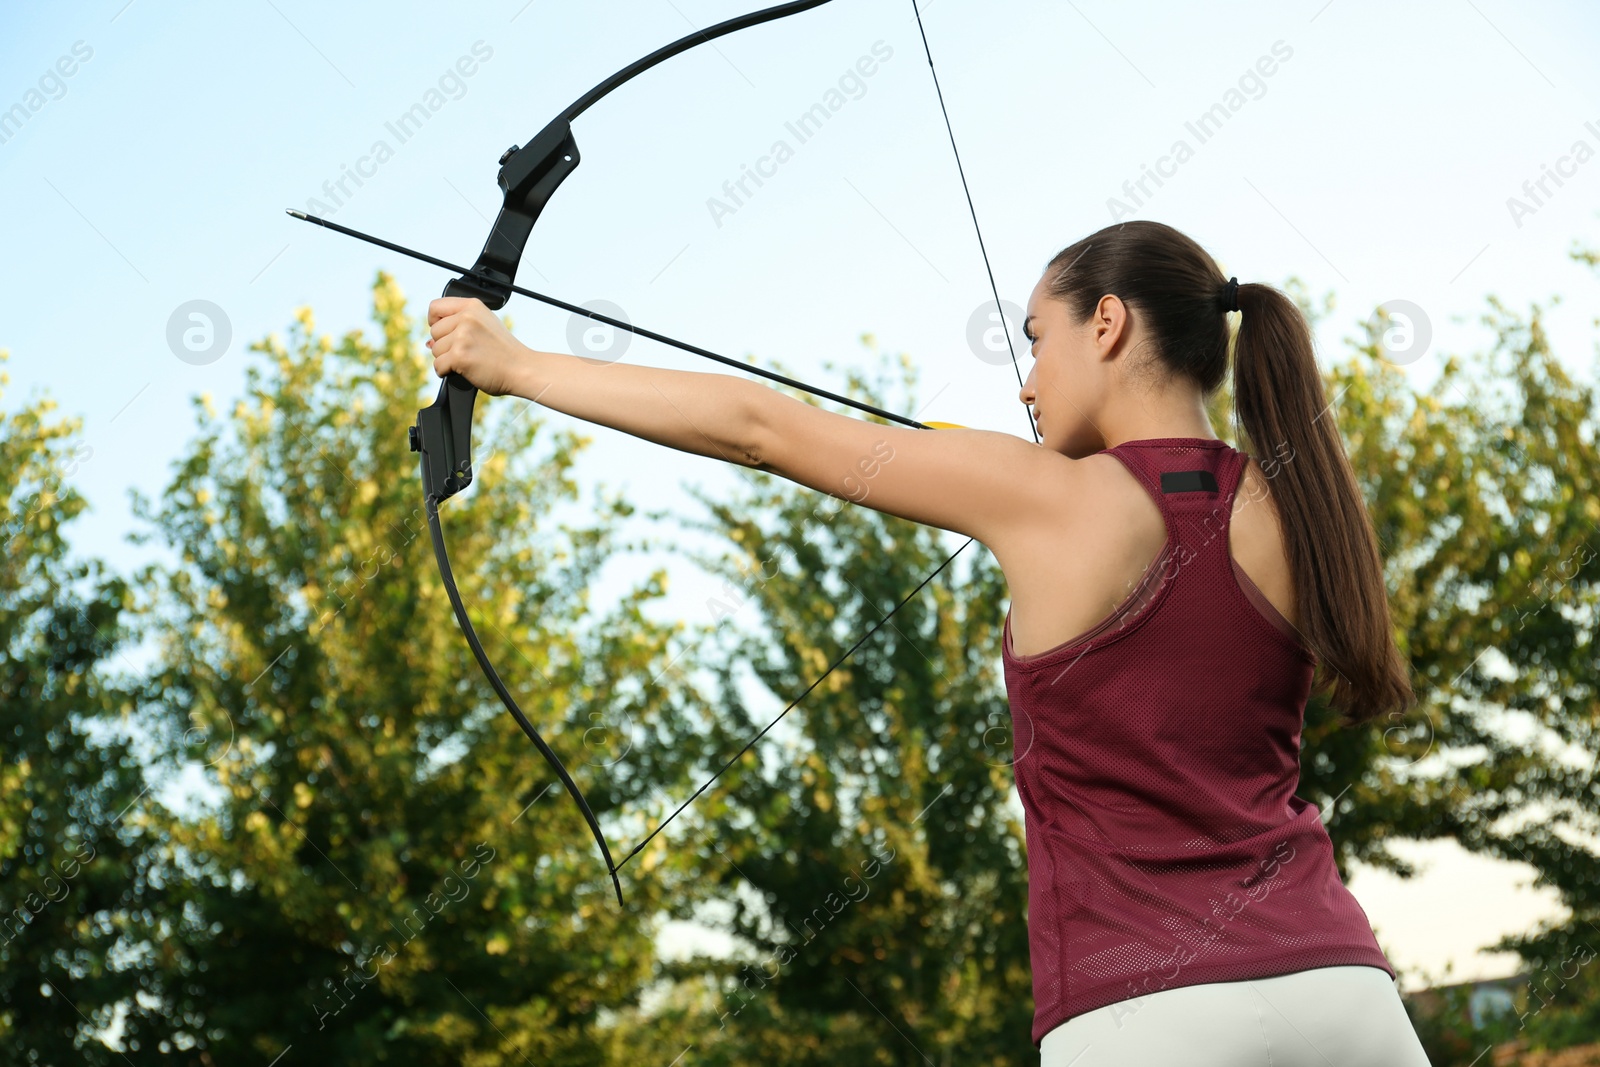 Photo of Woman with bow and arrow practicing archery outdoors